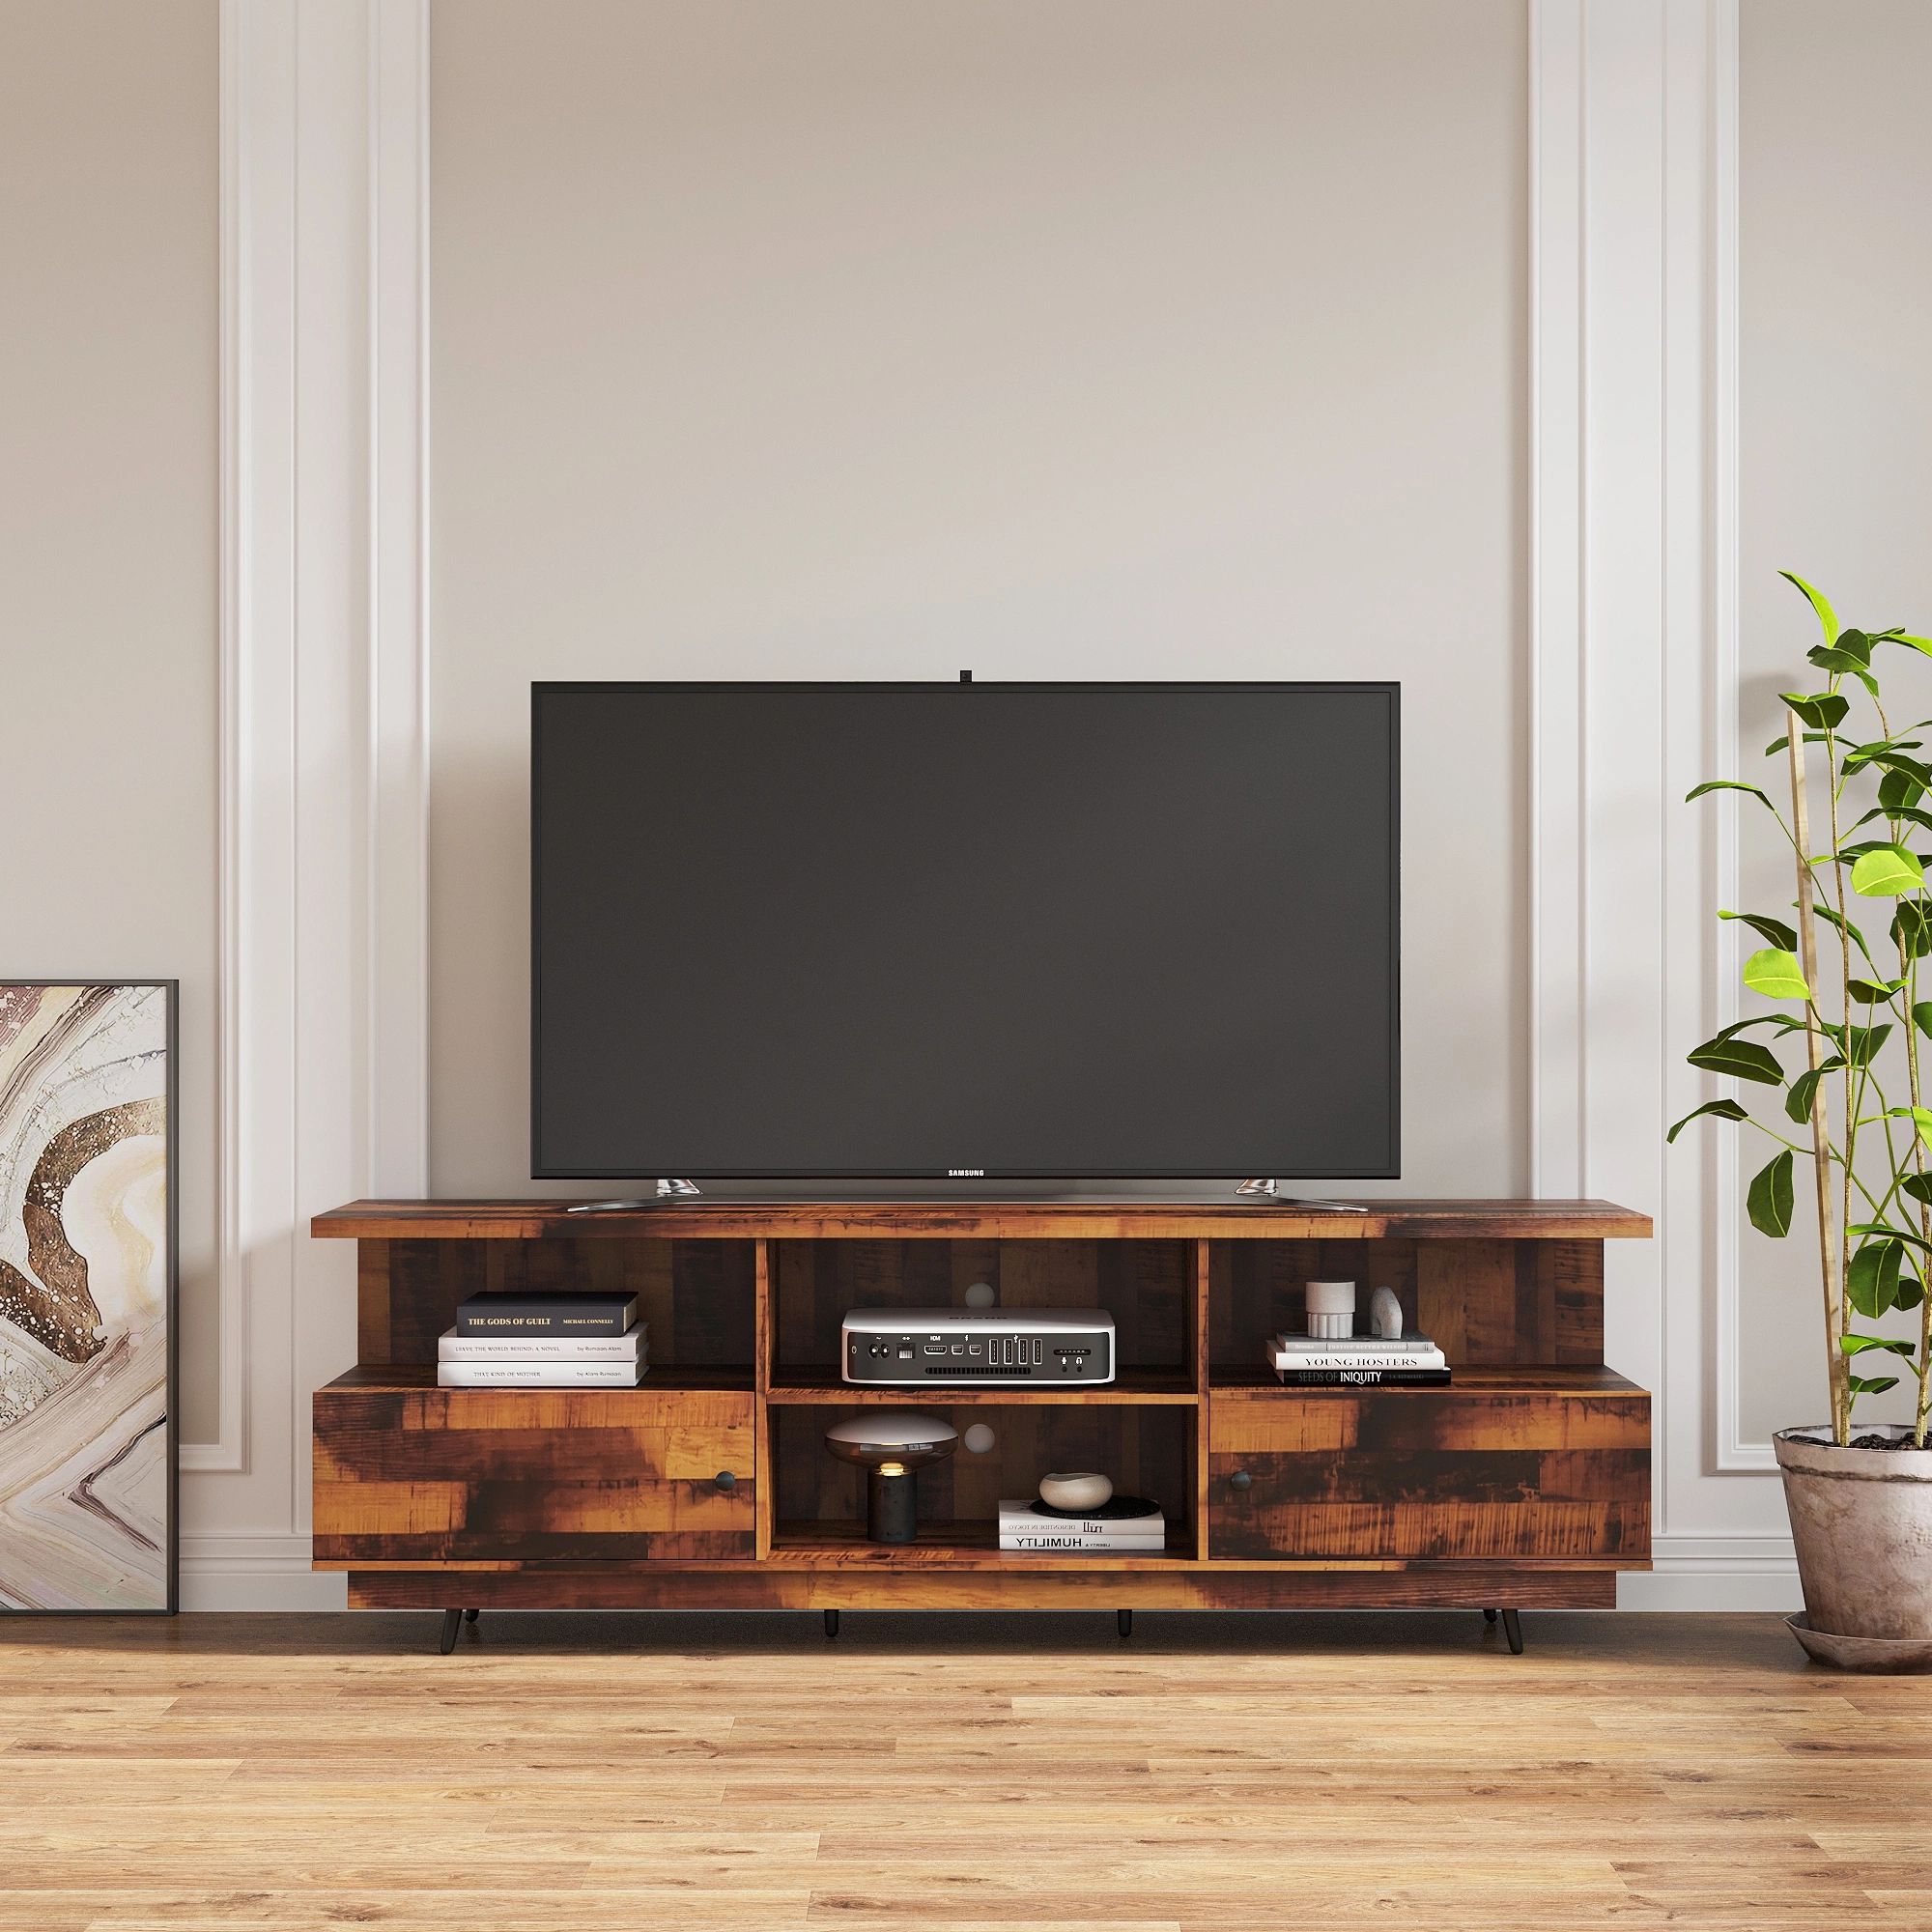 Dropship Tv Stand Modern Wood Media Entertainment Center Console Table With 2  Doors And 4 Open Shelves To Sell Online At A Lower Price | Doba Inside Tv Stands With 2 Doors And 2 Open Shelves (Photo 12 of 15)